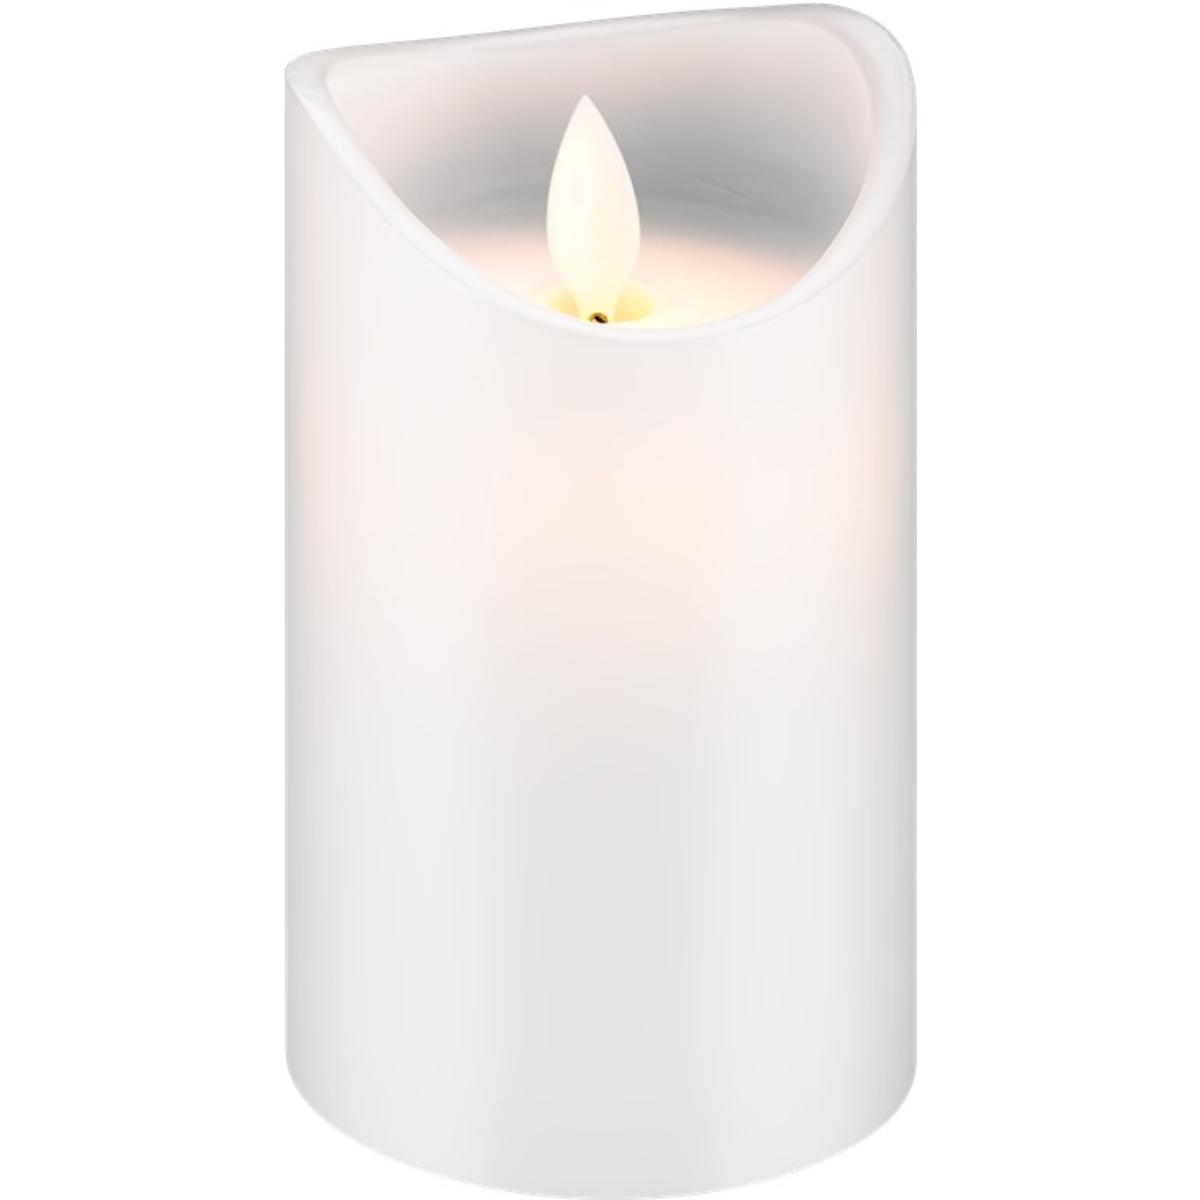 LED white real wax candle, 7.5 x 12.5 cm beautiful and safe lighting s - Goobay